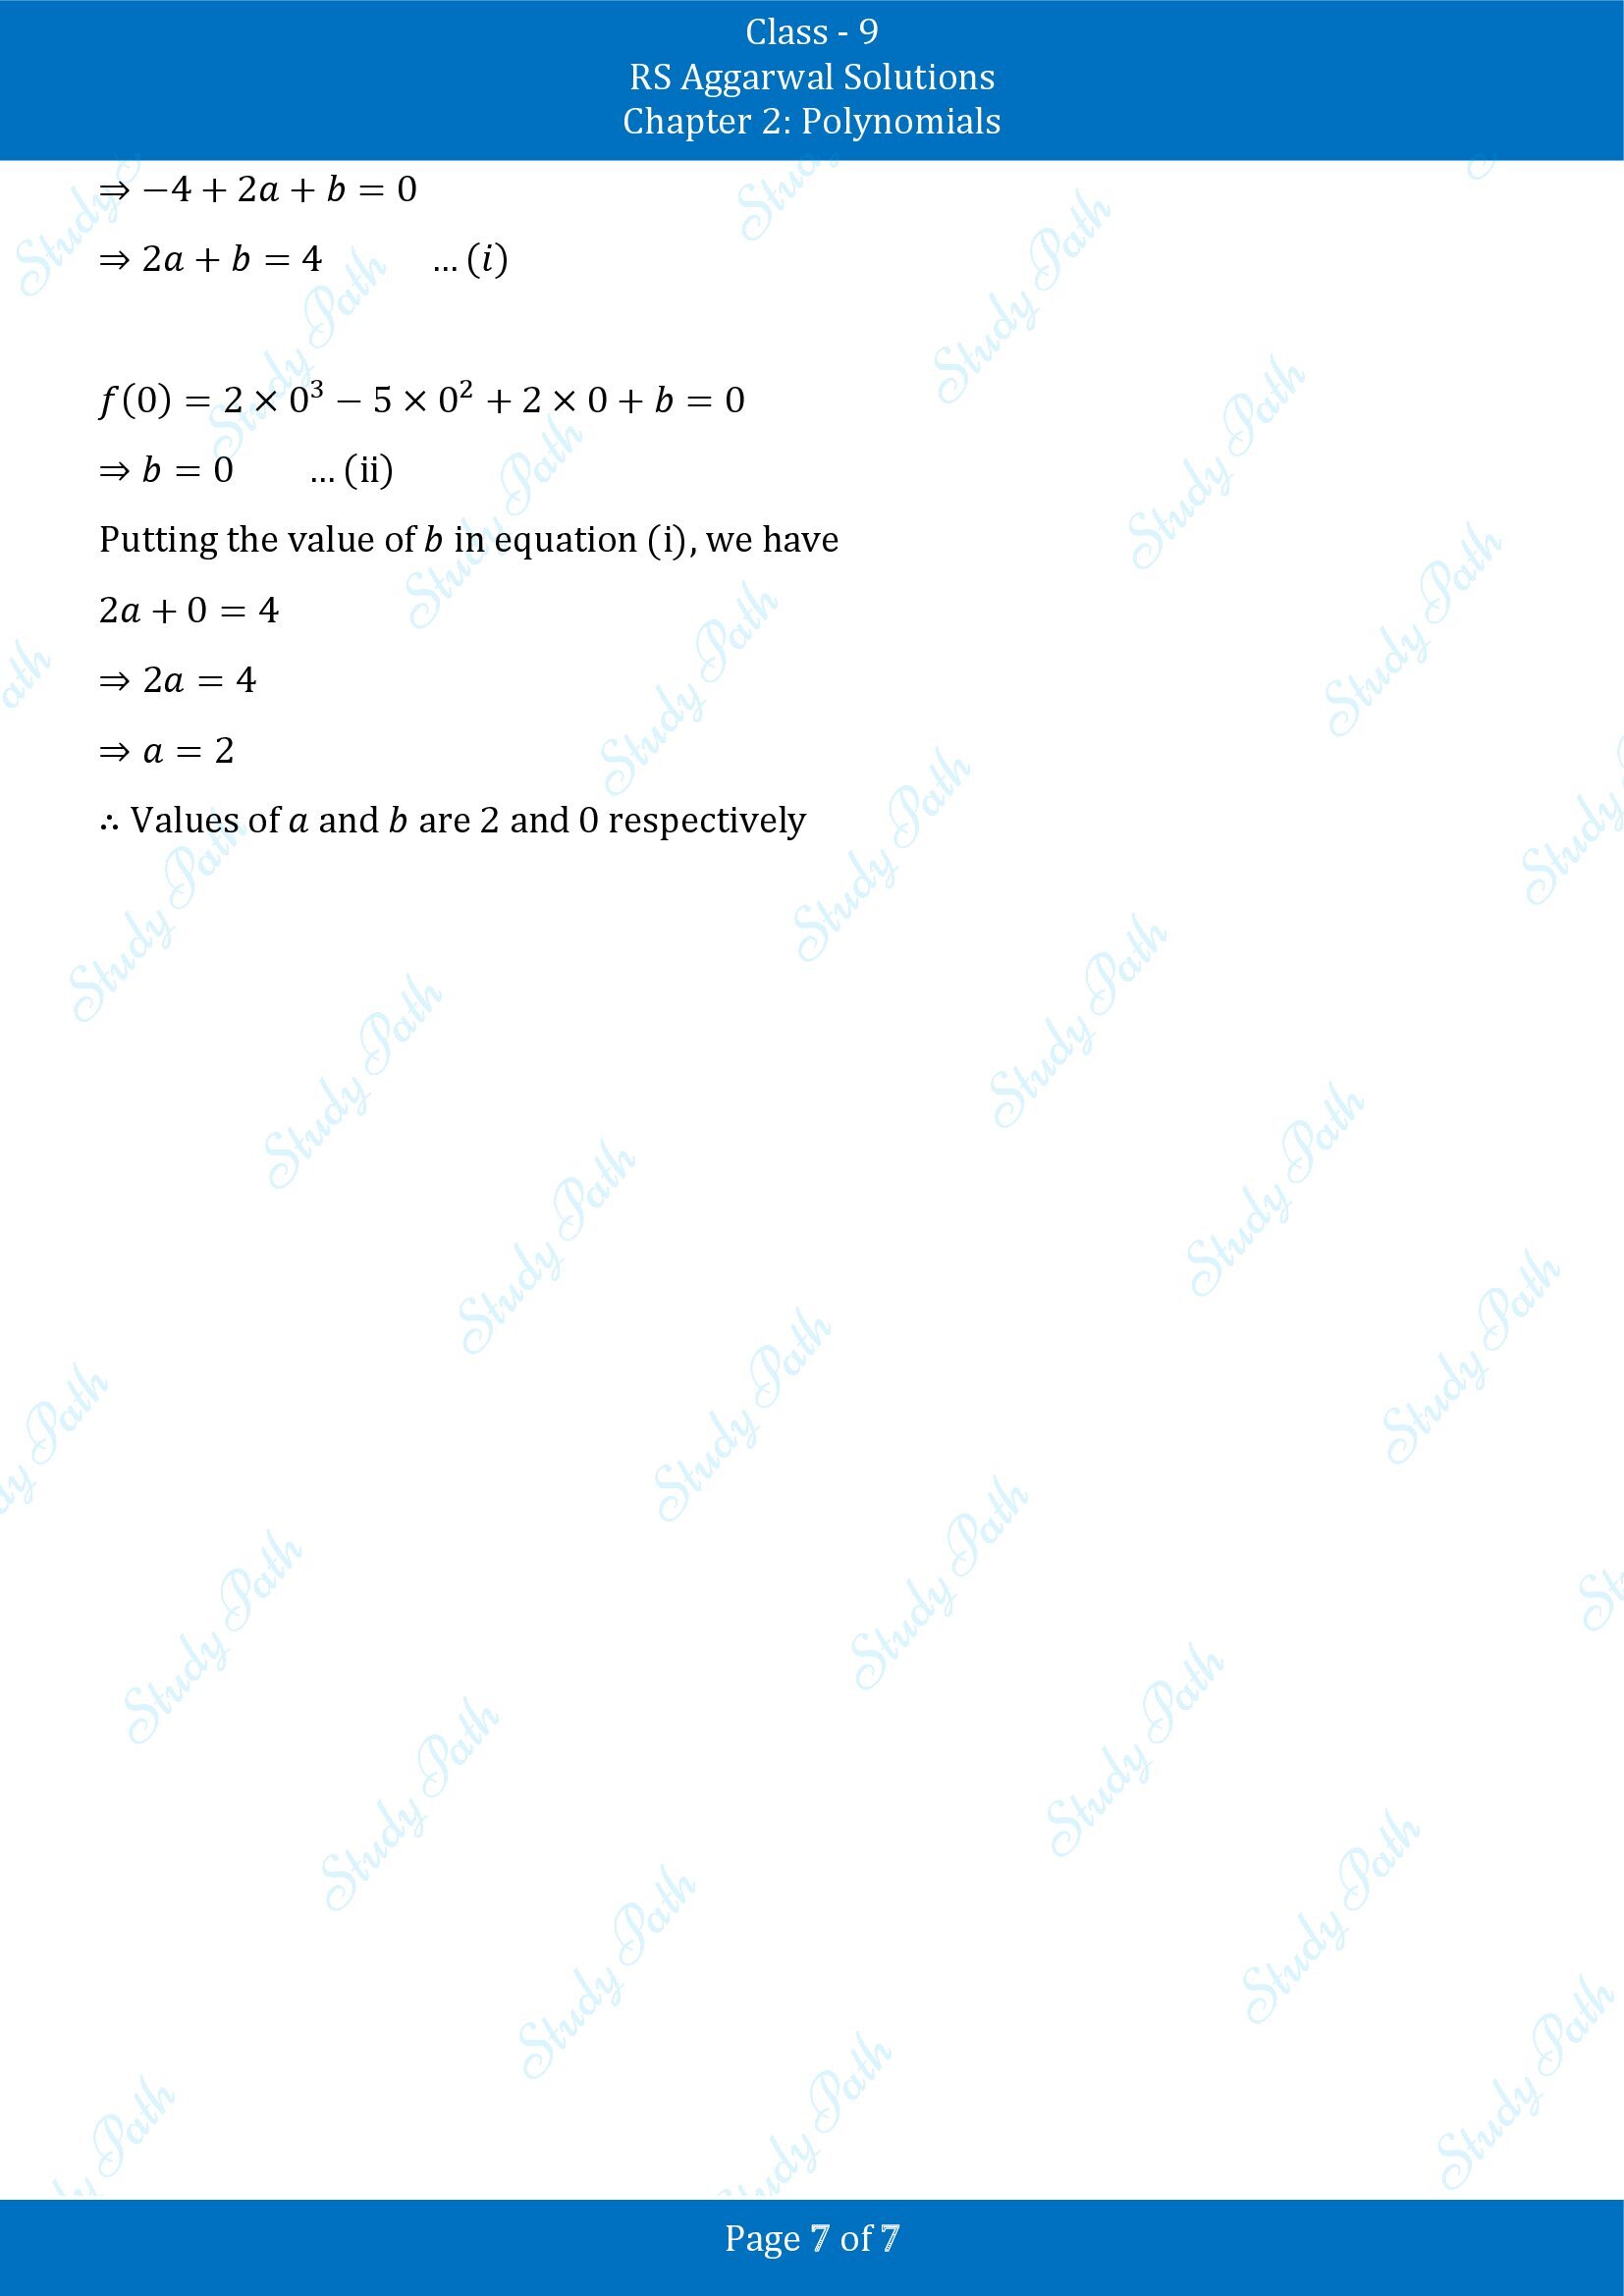 RS Aggarwal Solutions Class 9 Chapter 2 Polynomials Exercise 2B 00007